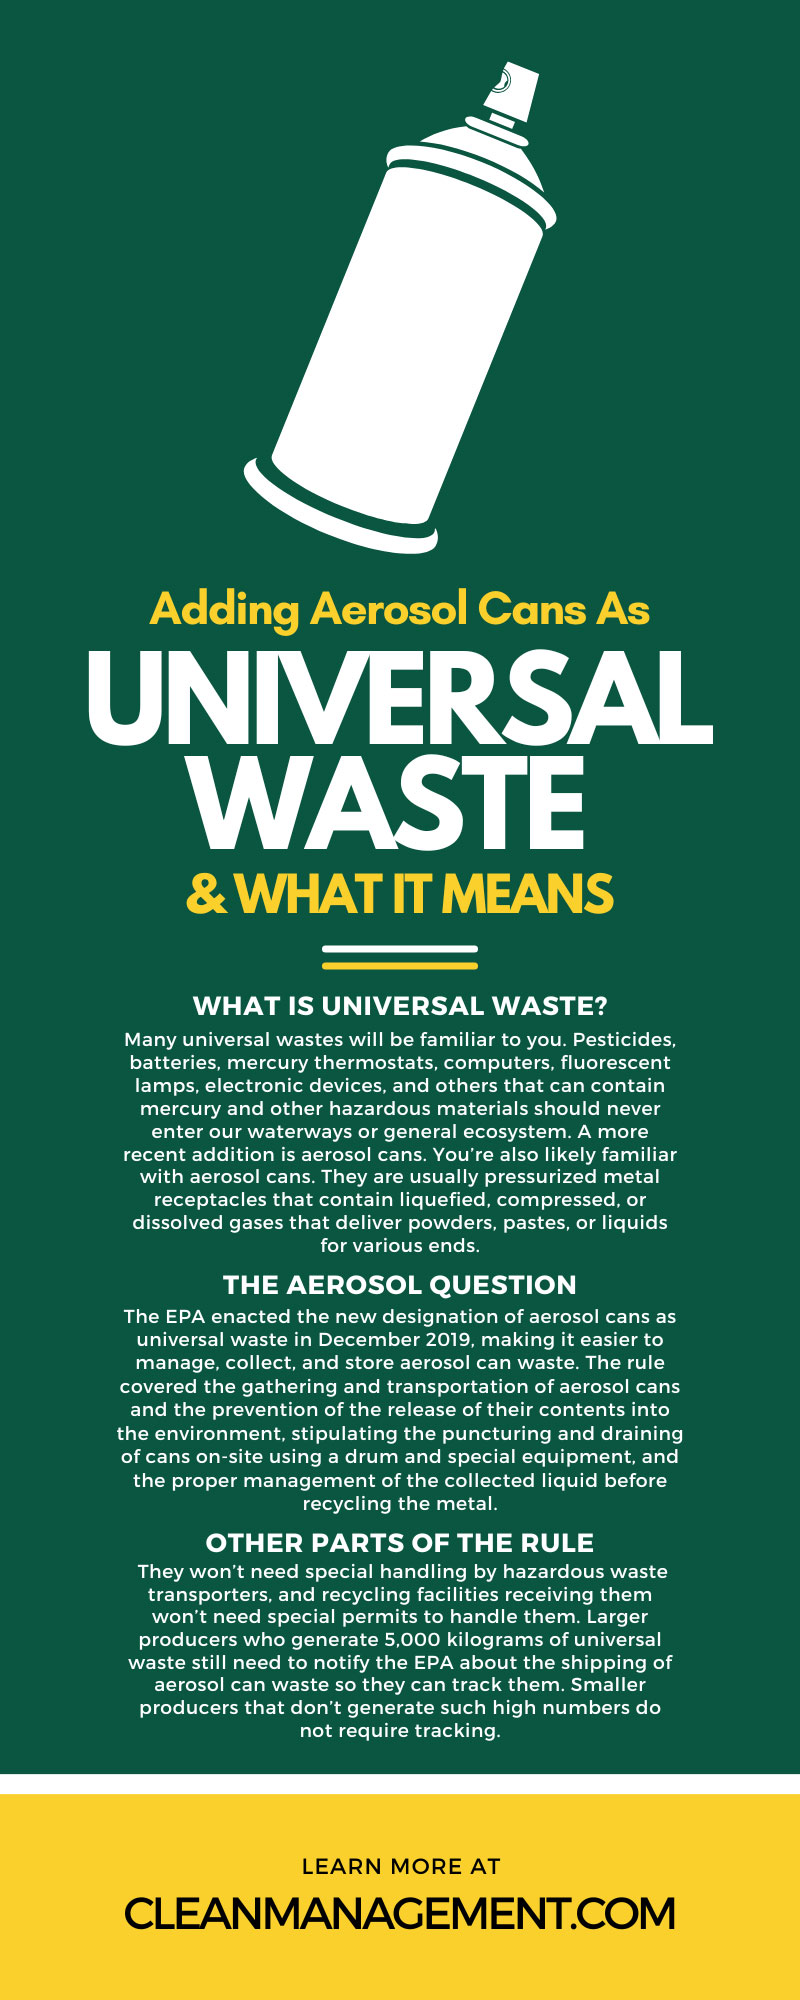 Adding Aerosol Cans as Universal Waste & What It Means